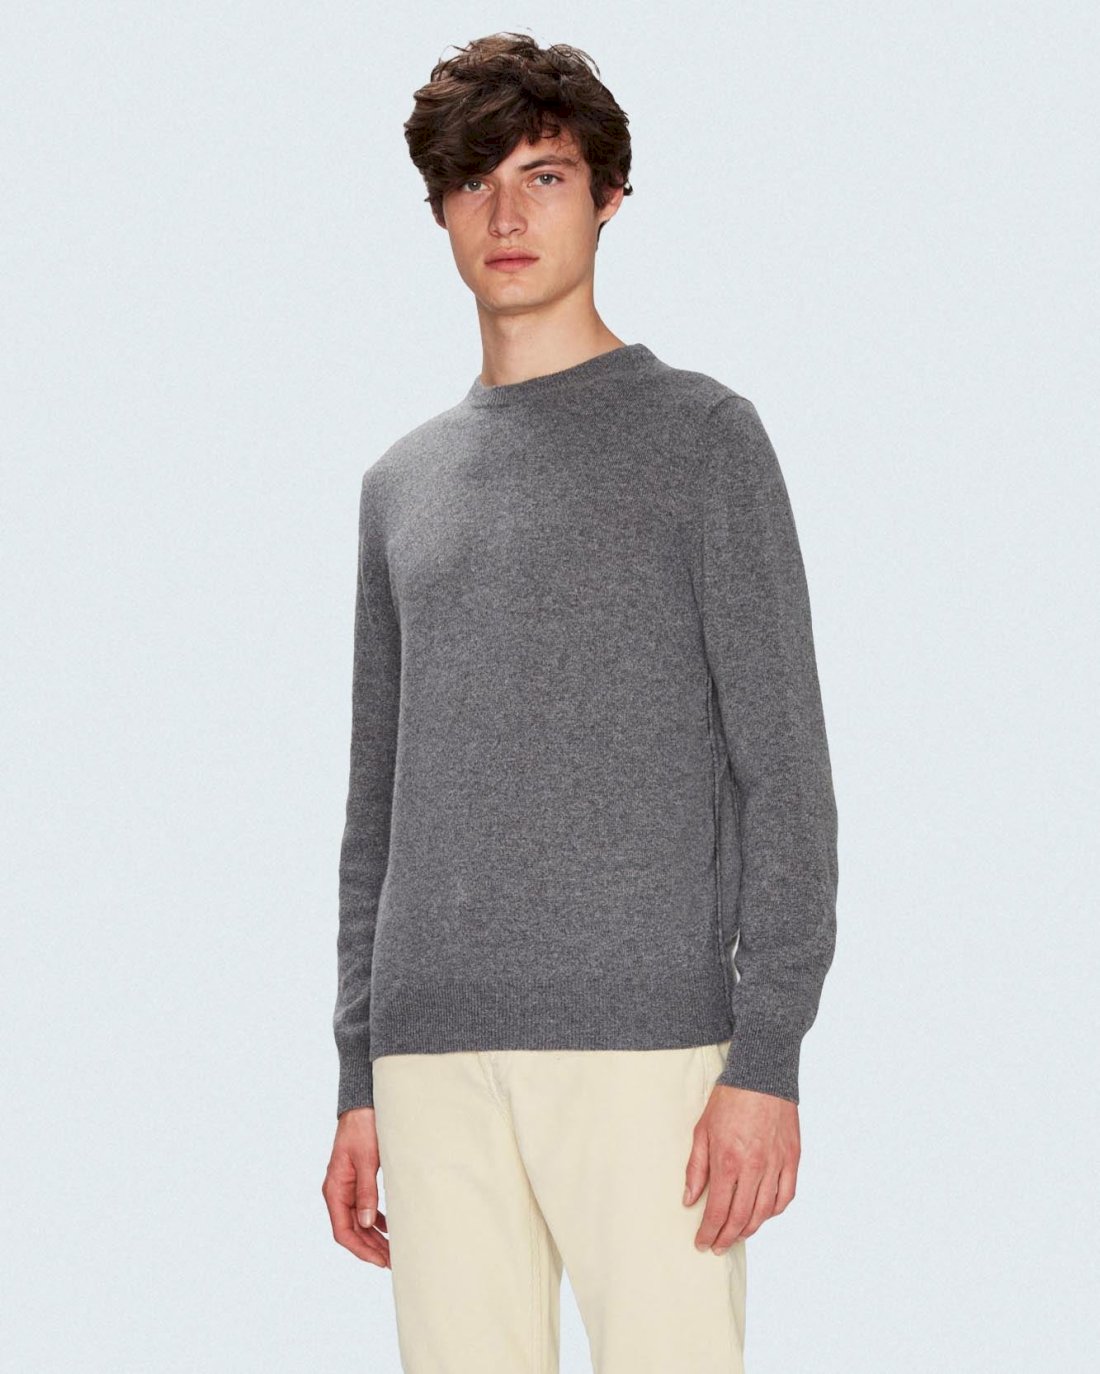 Cashmere Crew in Grey | 7 For All Mankind